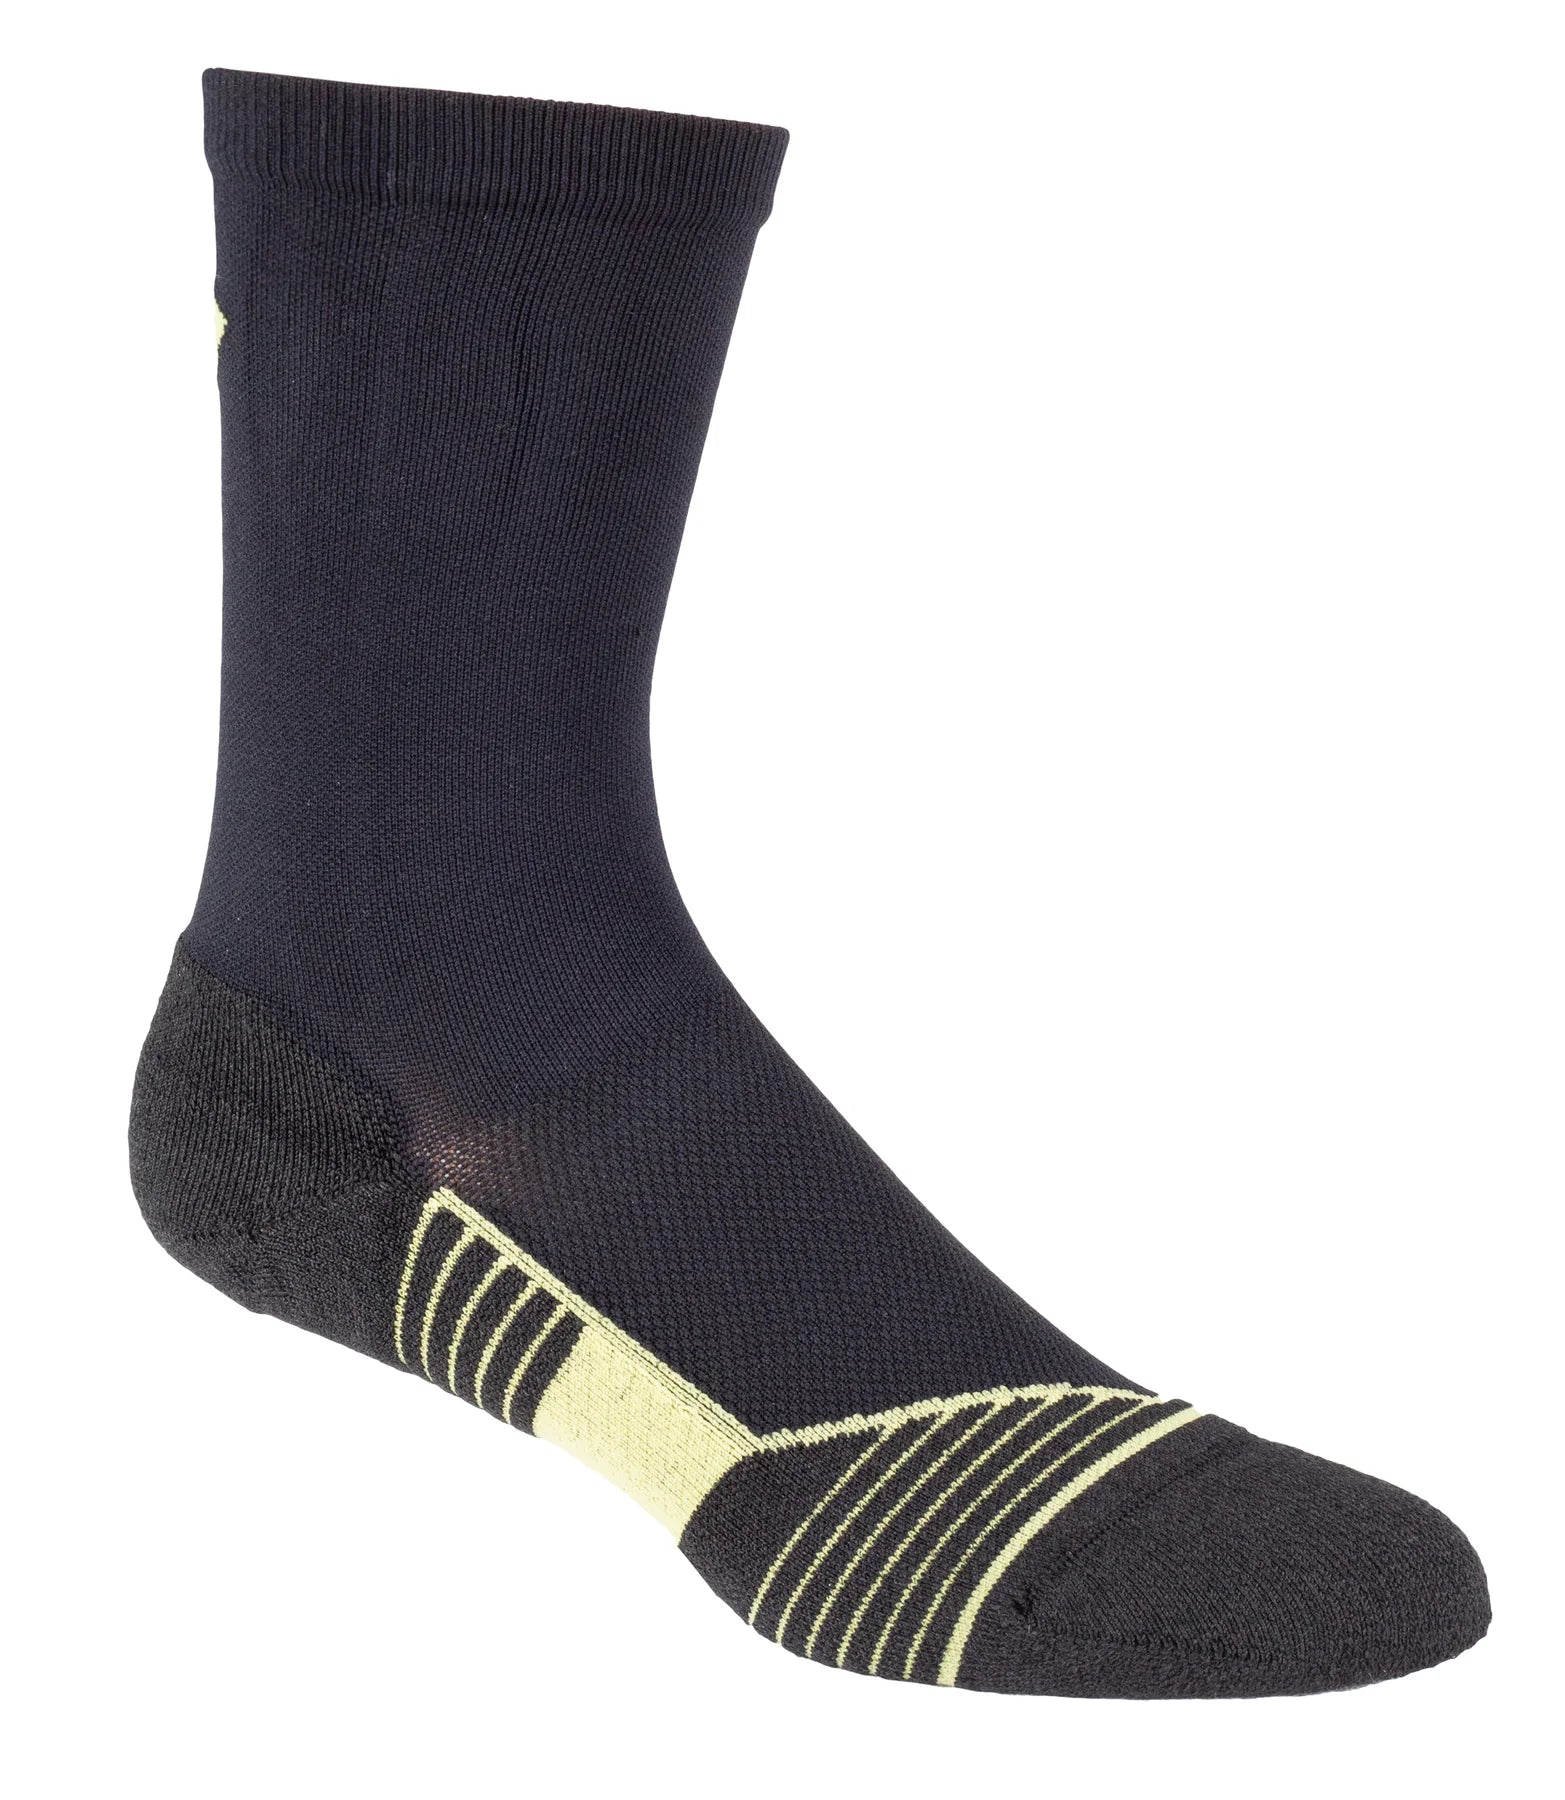 First Tactical - 6" Advanced Duty Sock